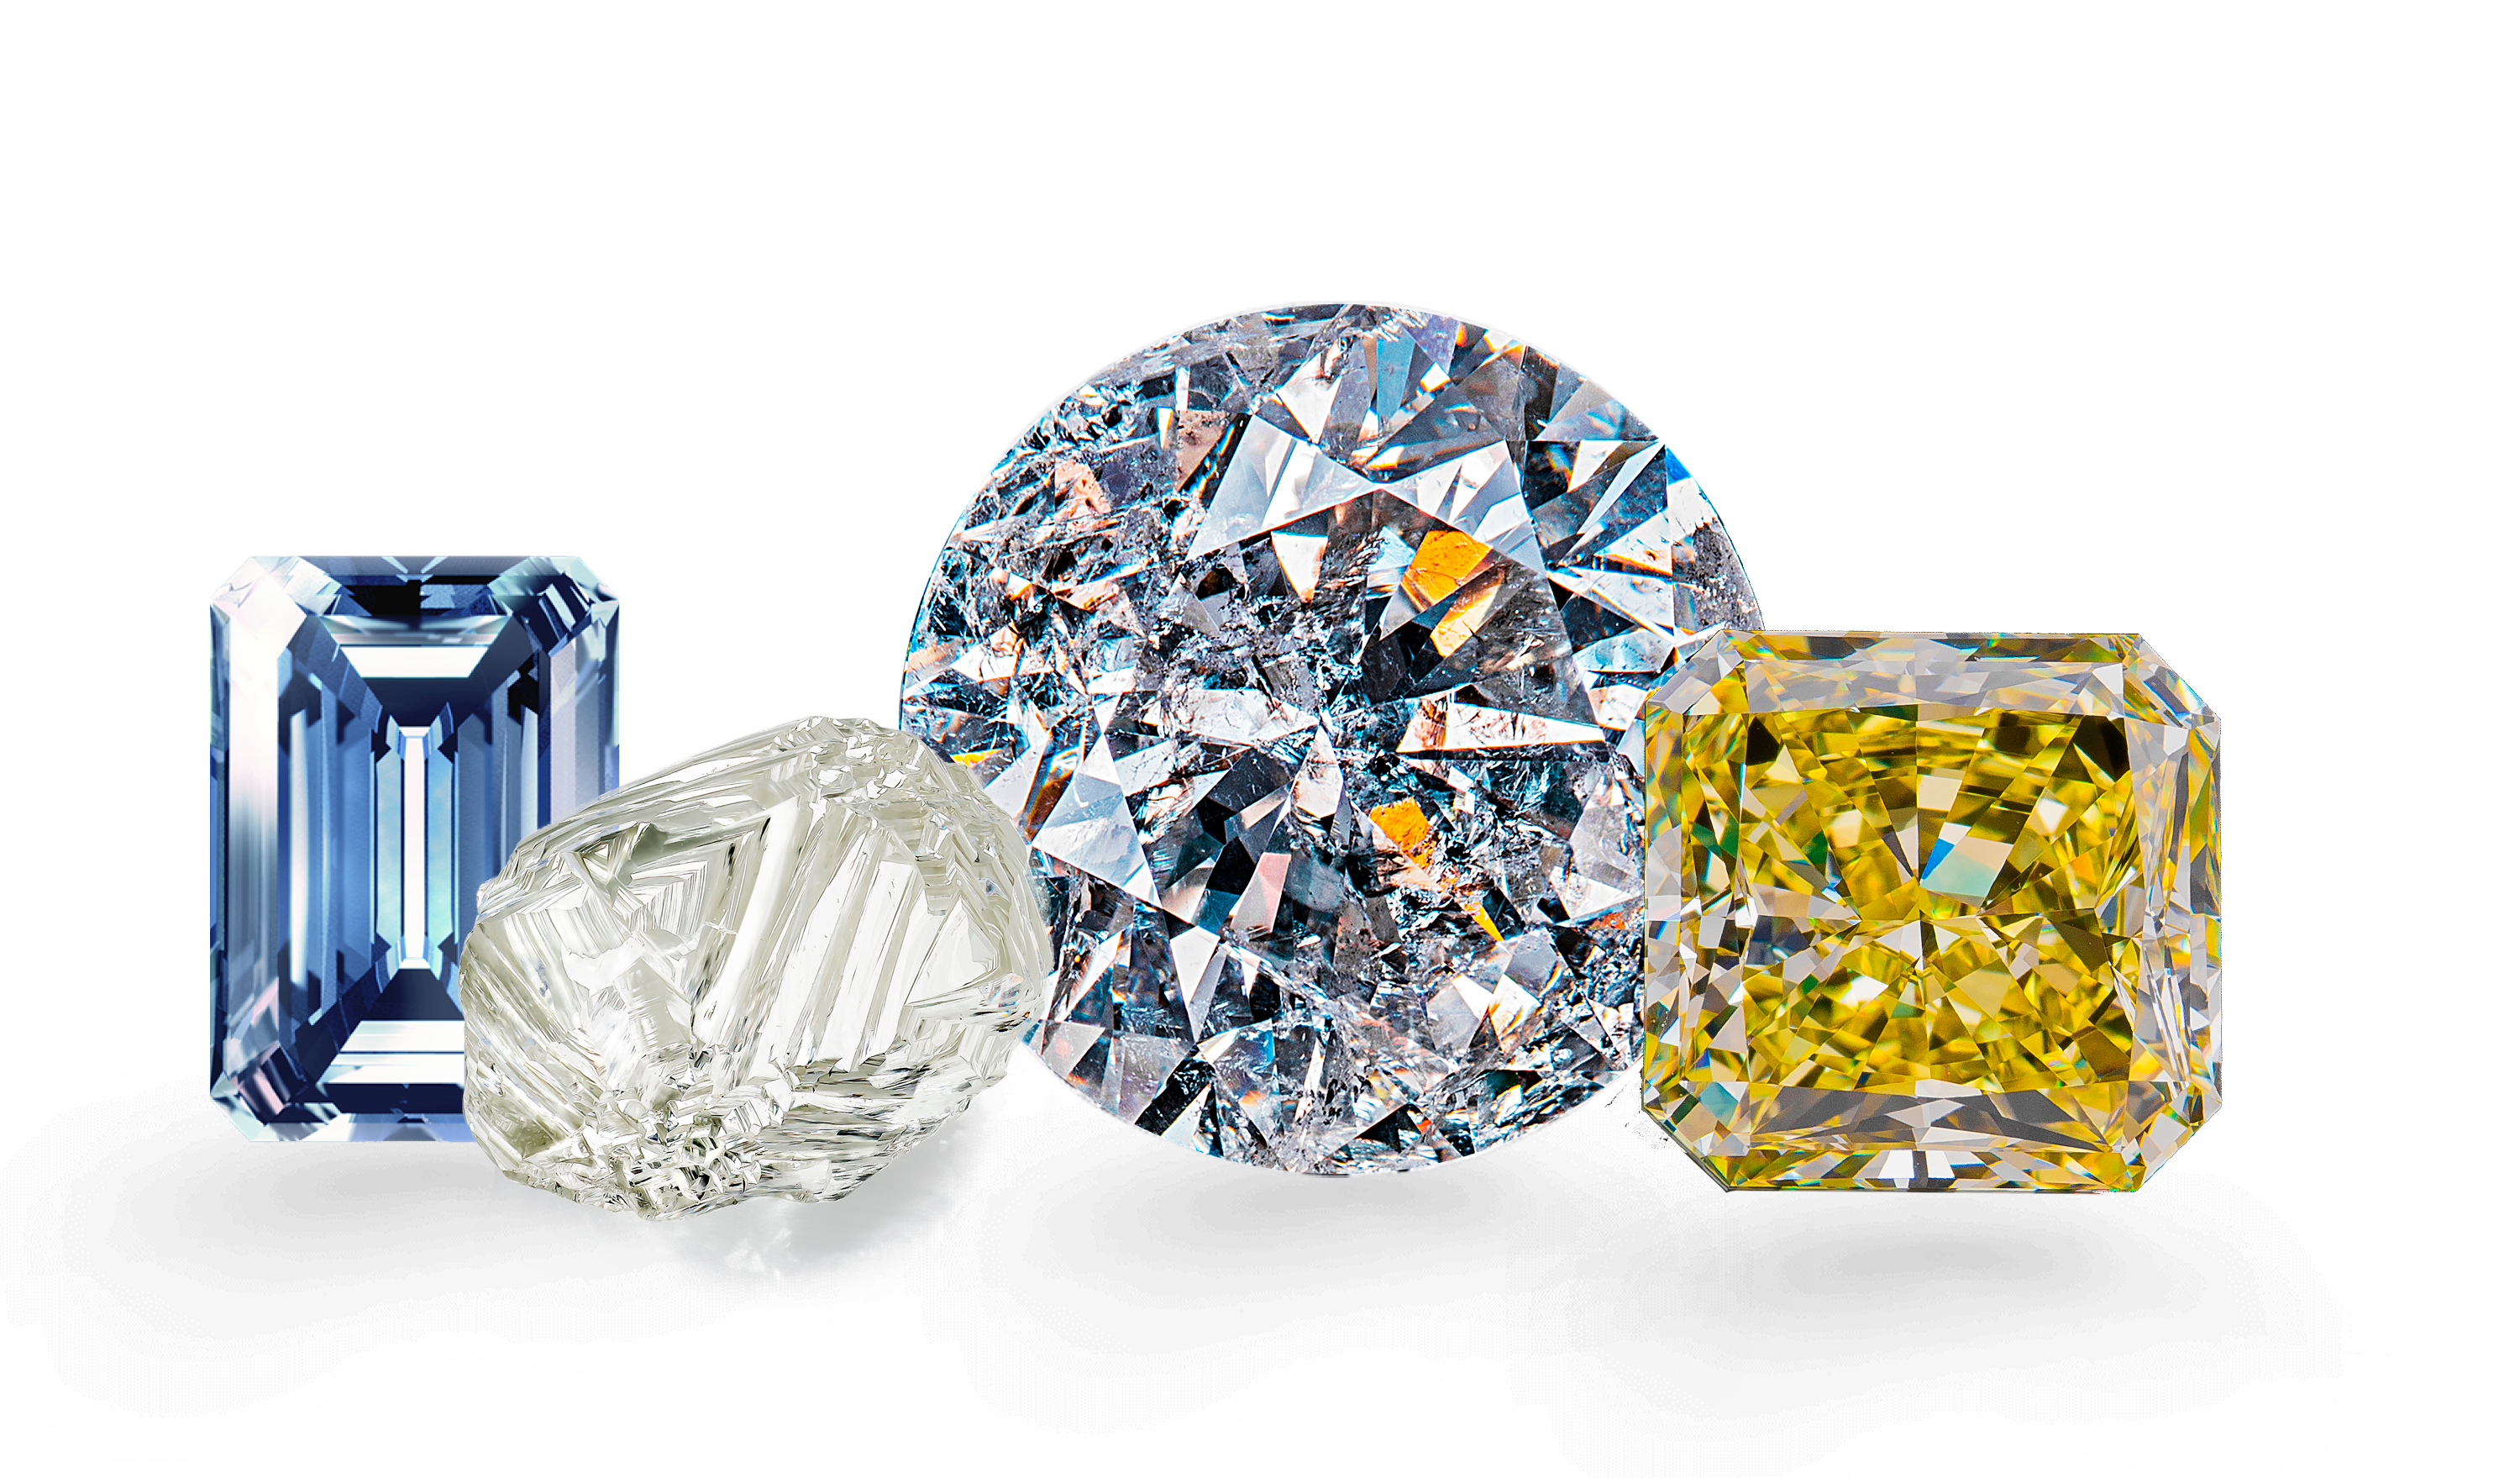 Synthetic Diamond Market Gains Momentum with a Projected CAGR of 6.18% by 2030